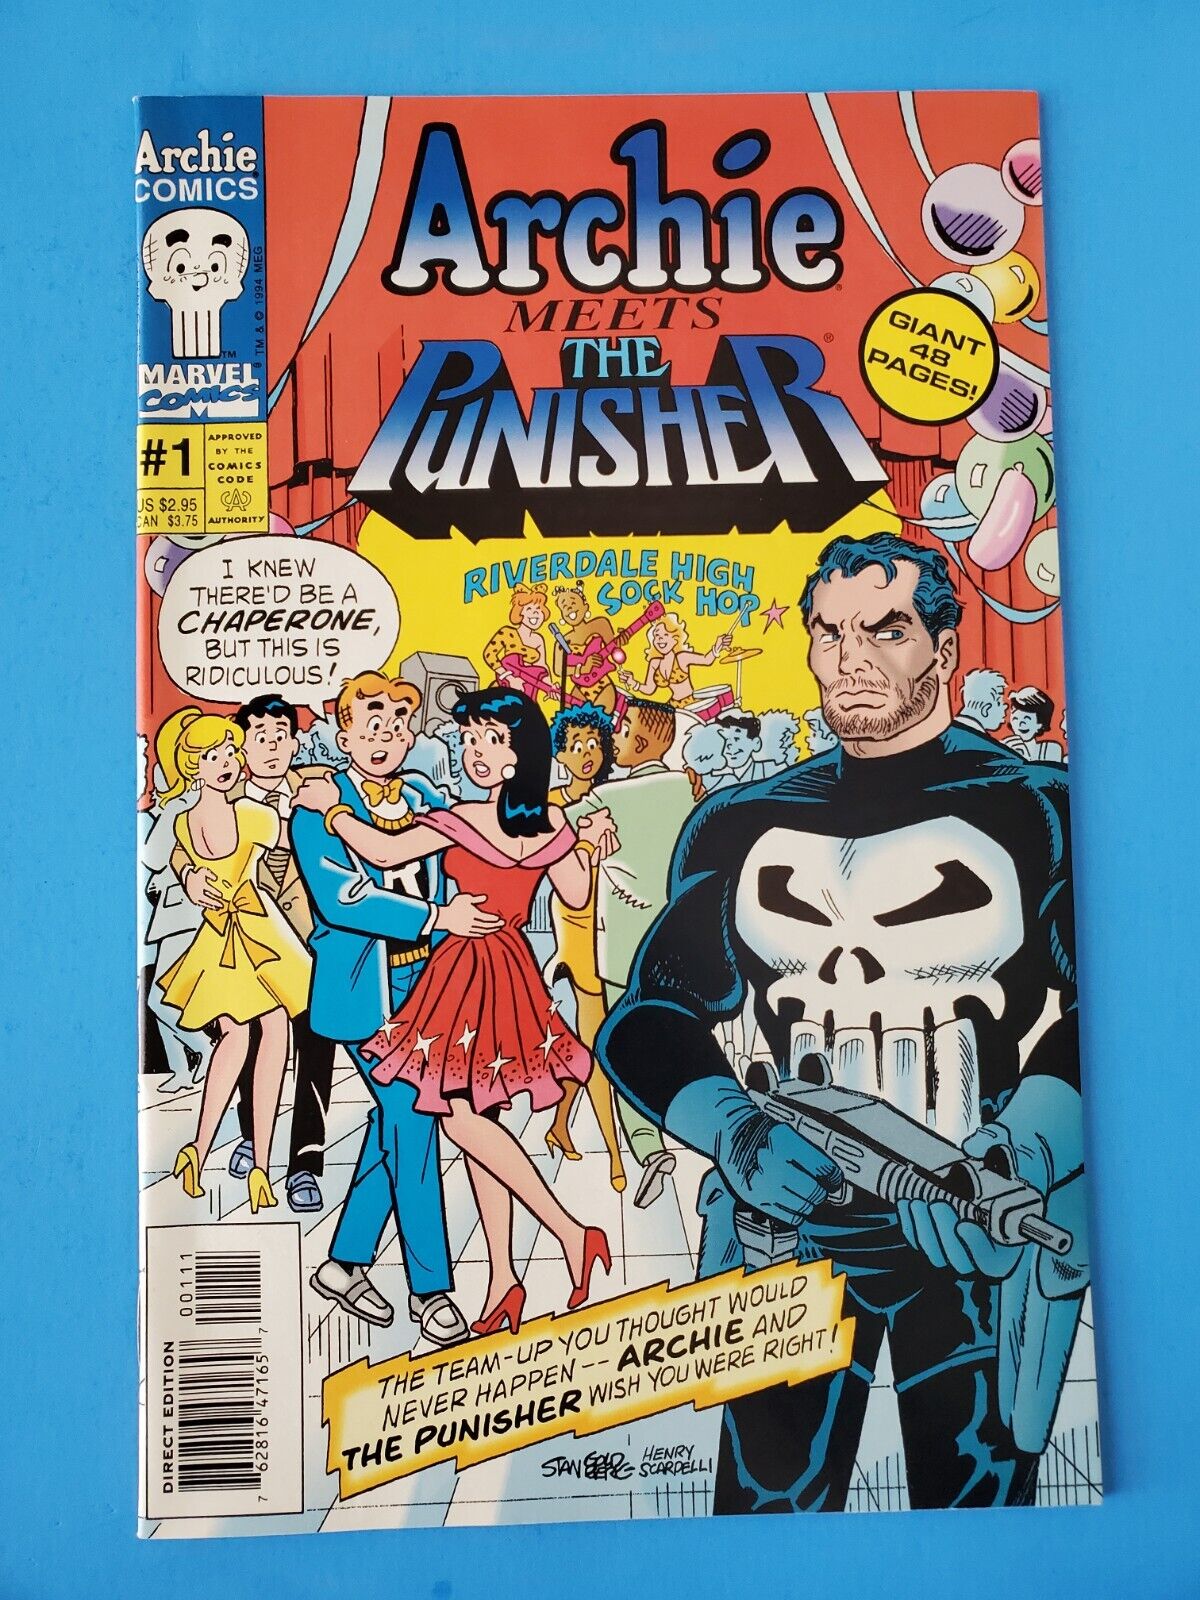 Archie Meets the Punisher #1 - Archie / Marvel Comics Crossover 1994